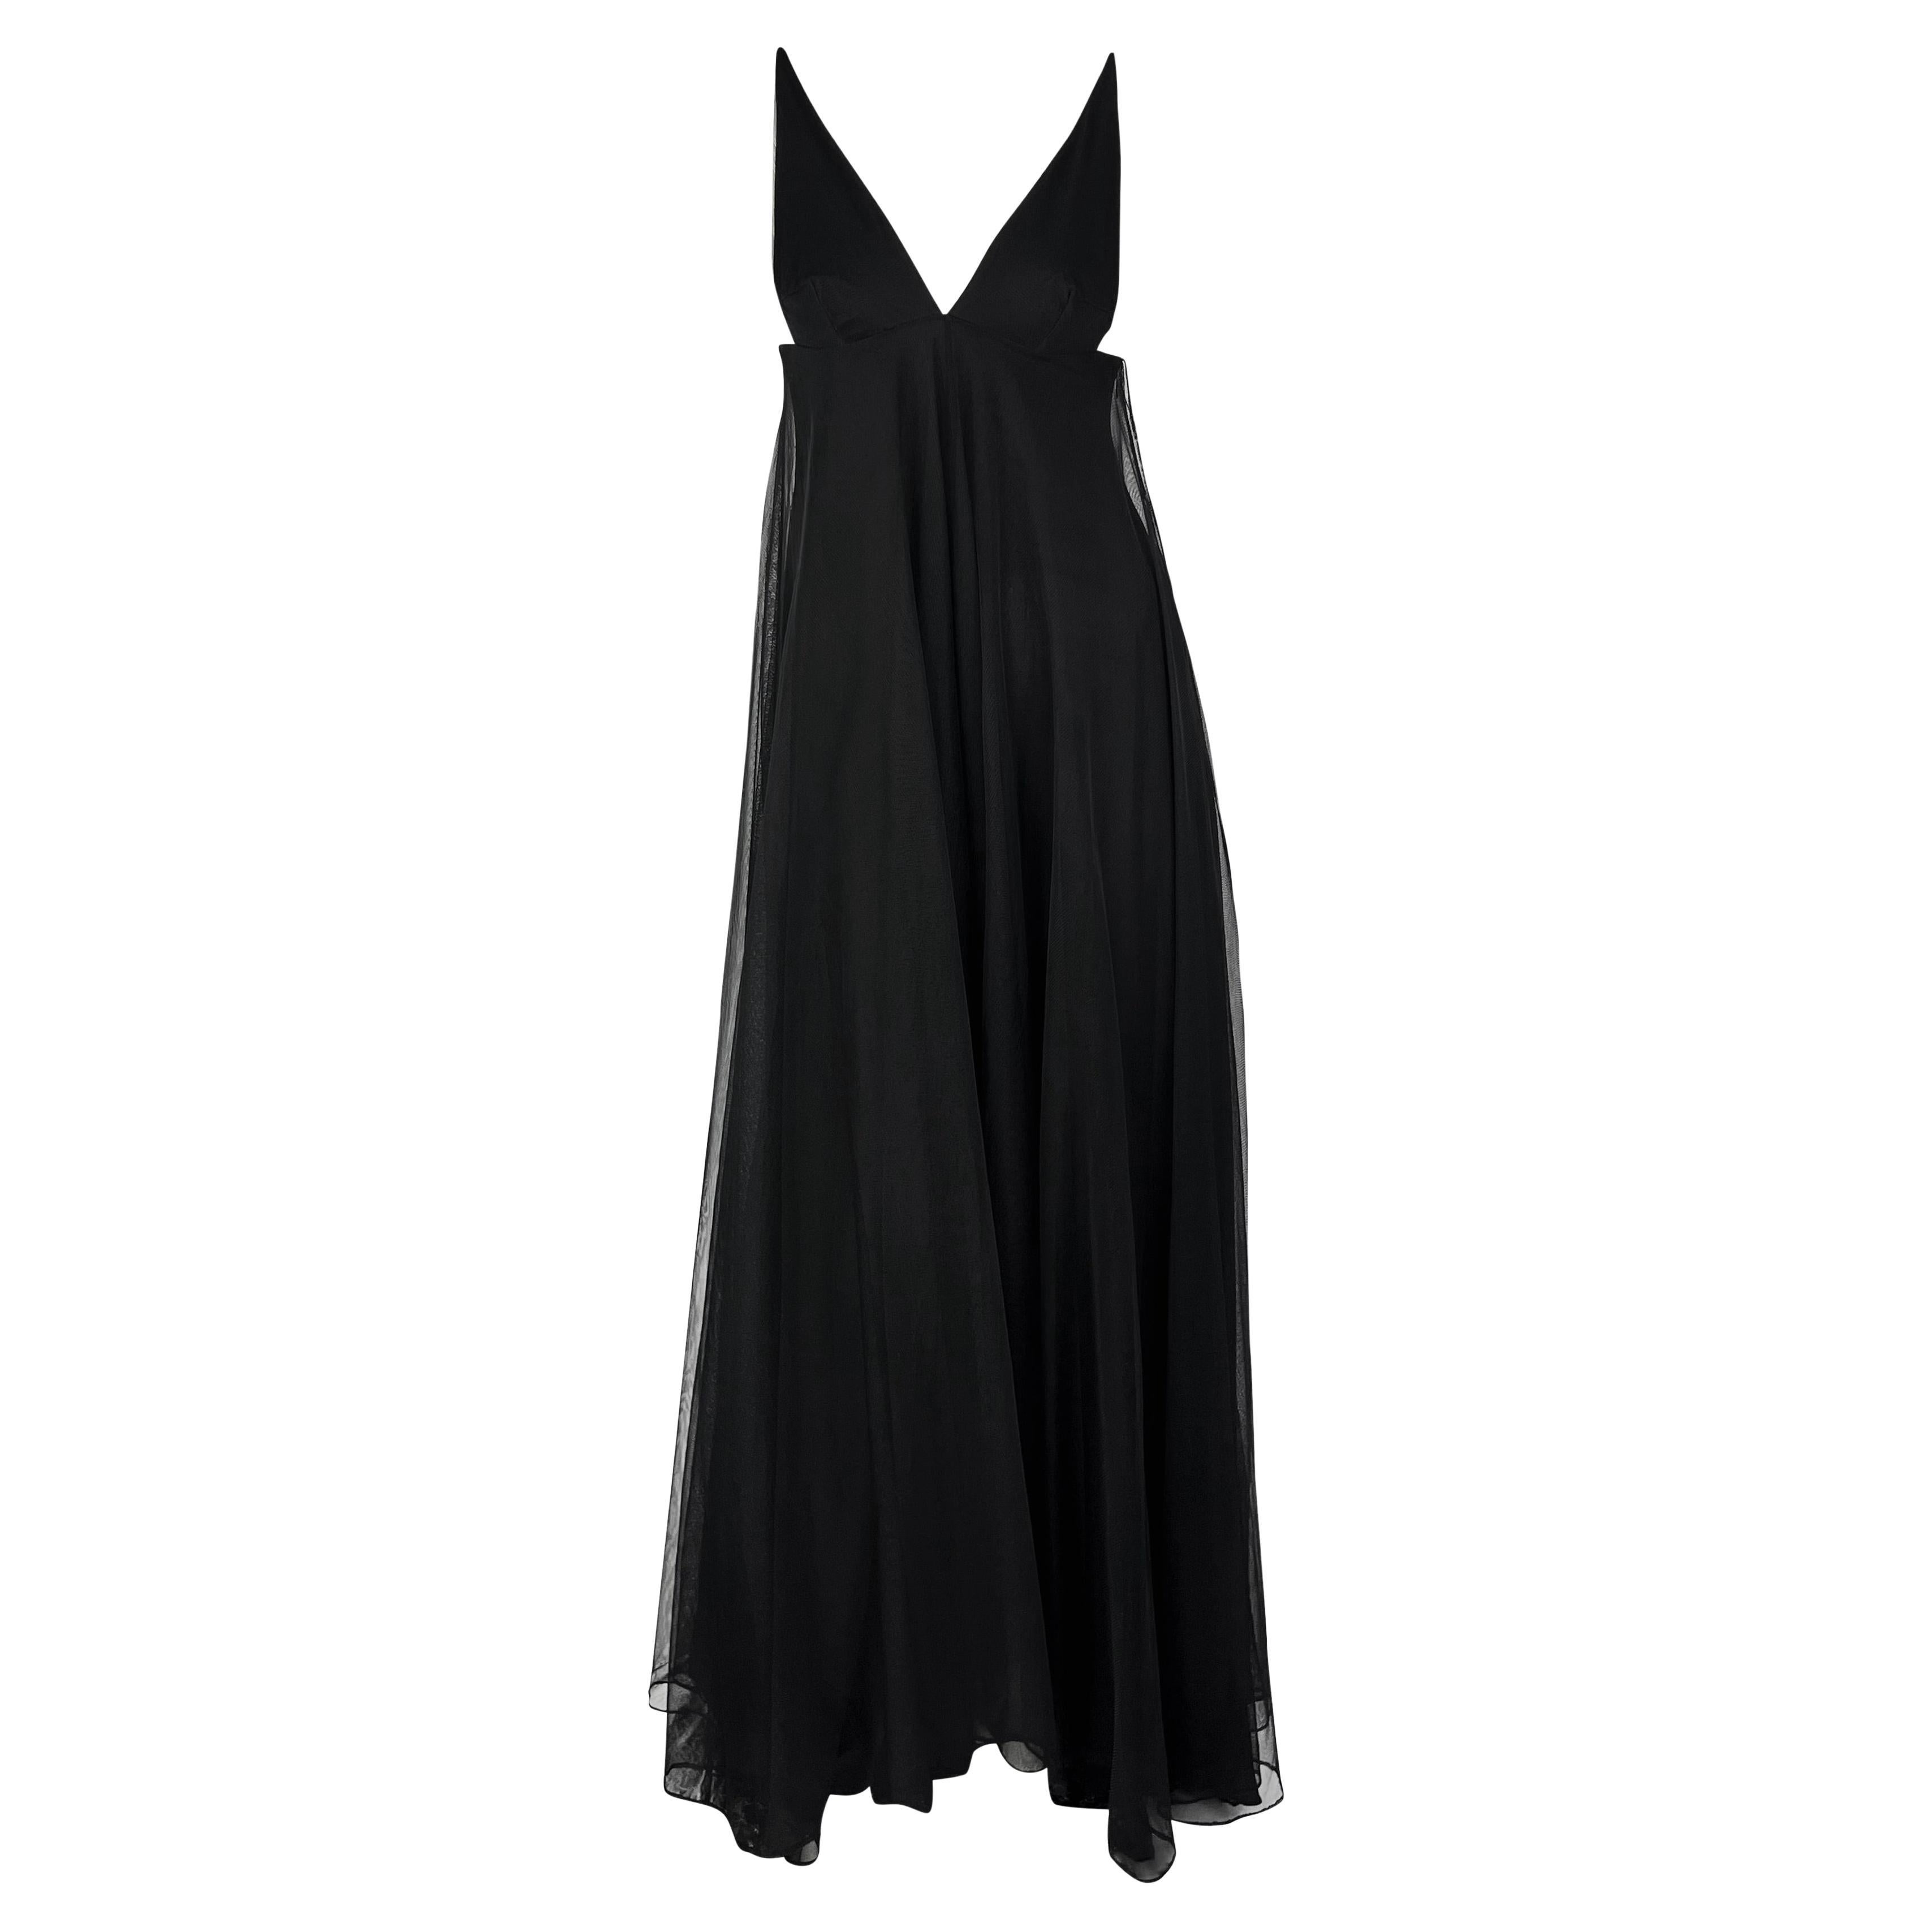 F/W 1998 Gucci by Tom Ford Runway Black Layered Tulle Sheer Plunge Gown For Sale